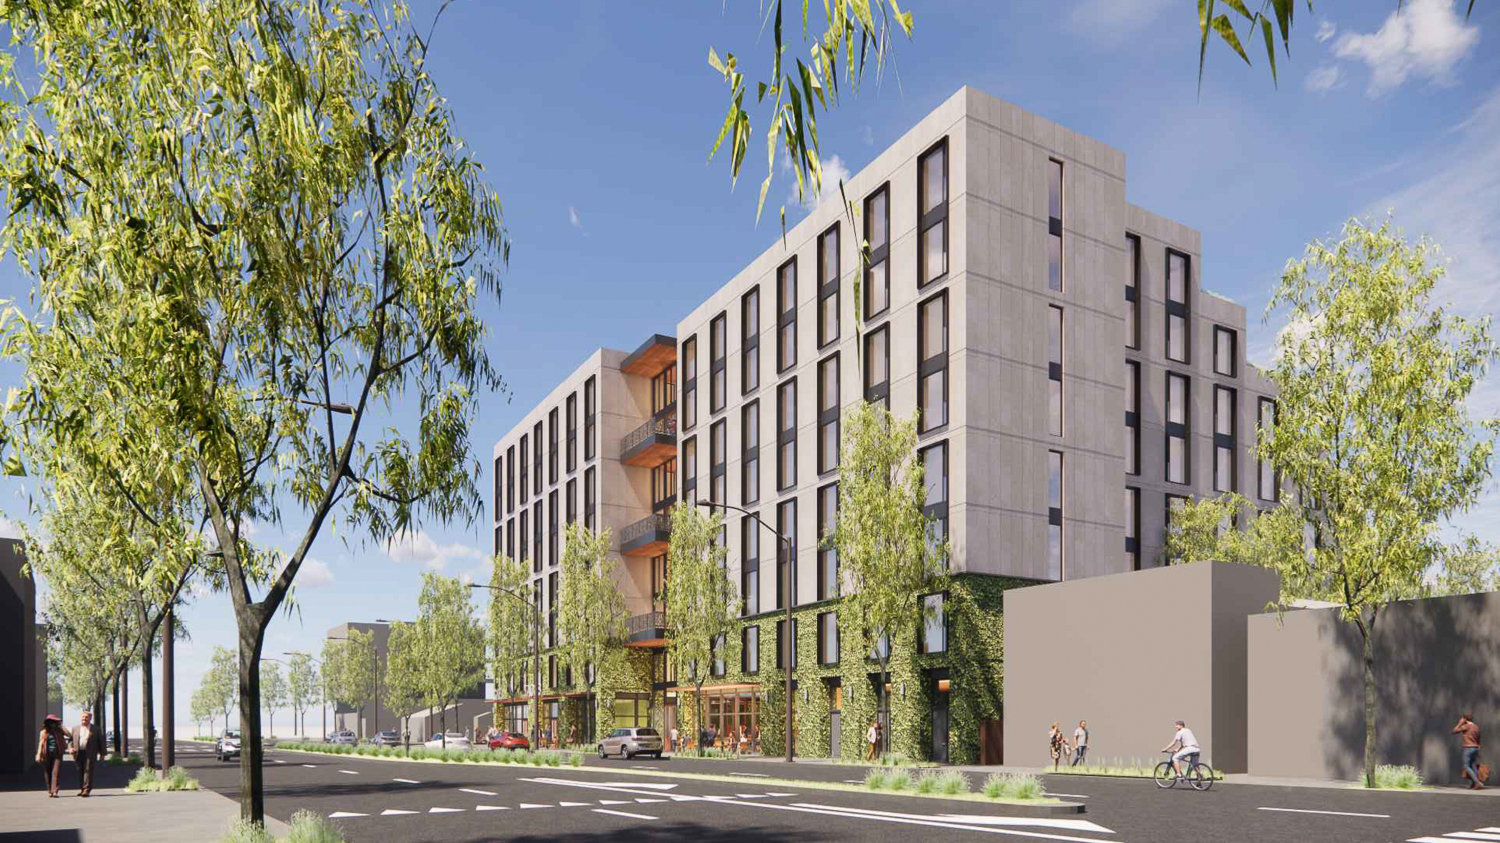 2601 San Pablo Avenue looking north, rendering by Trachtenberg Architects